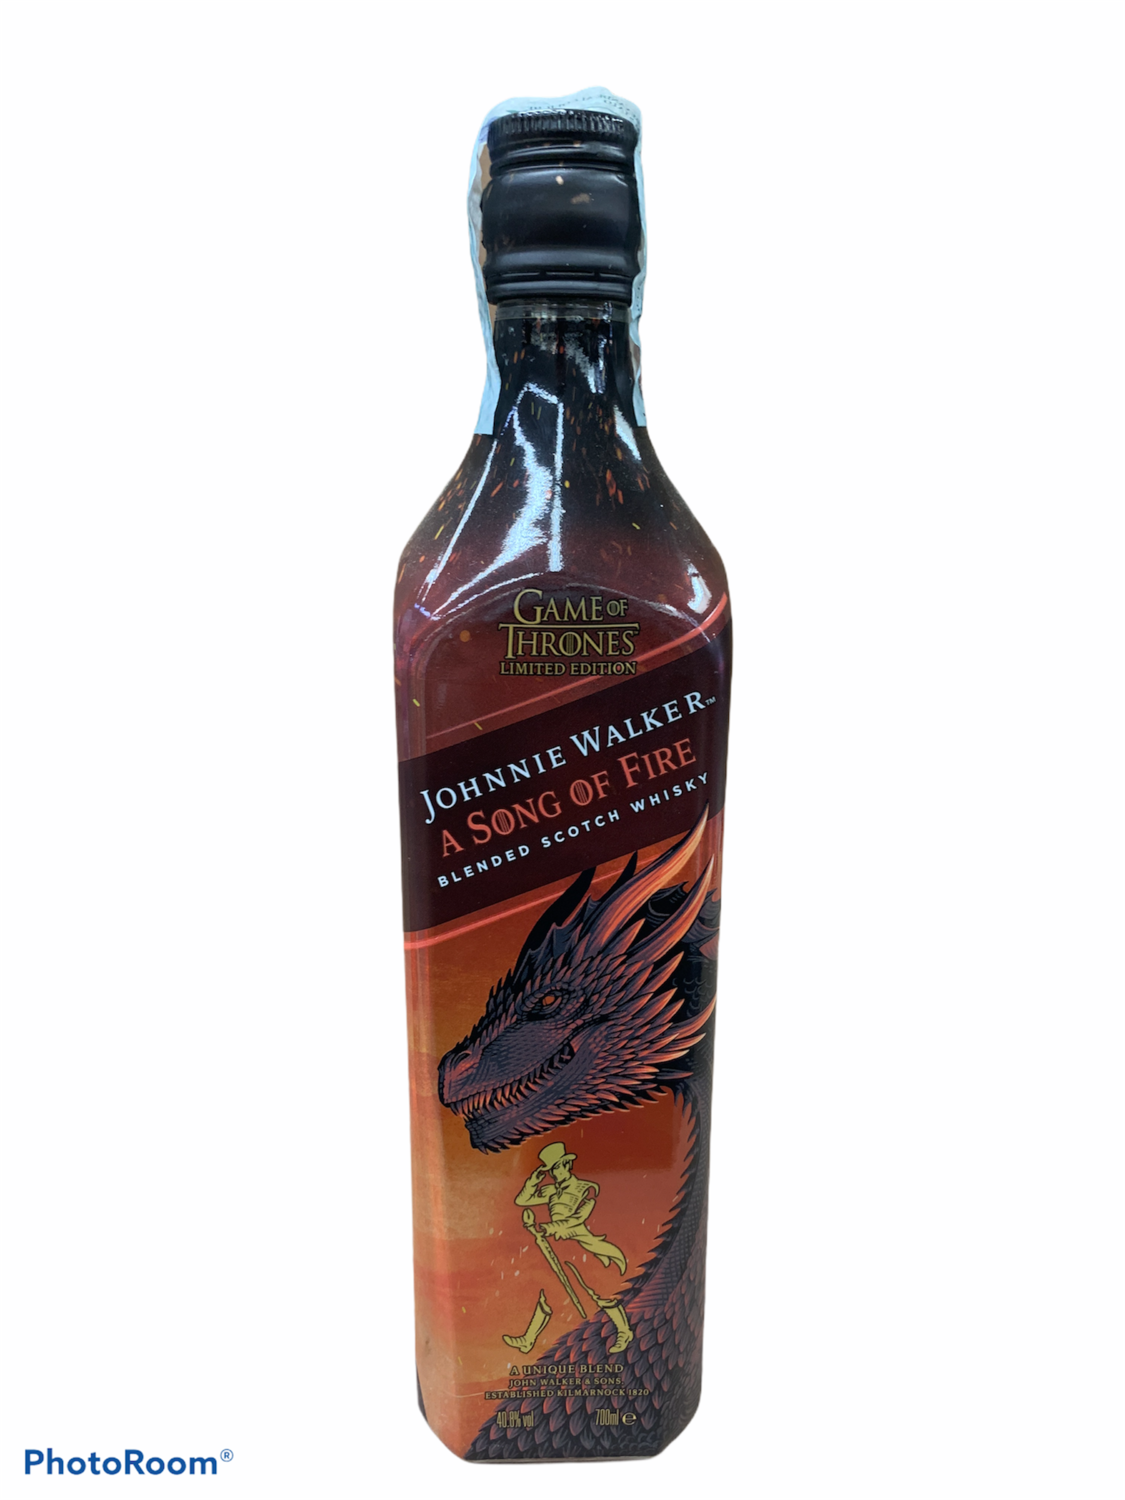 Johnnie Walker Scotch Whisky -Game of Thrones- "A Song Of Fire" 70cl 40,8%